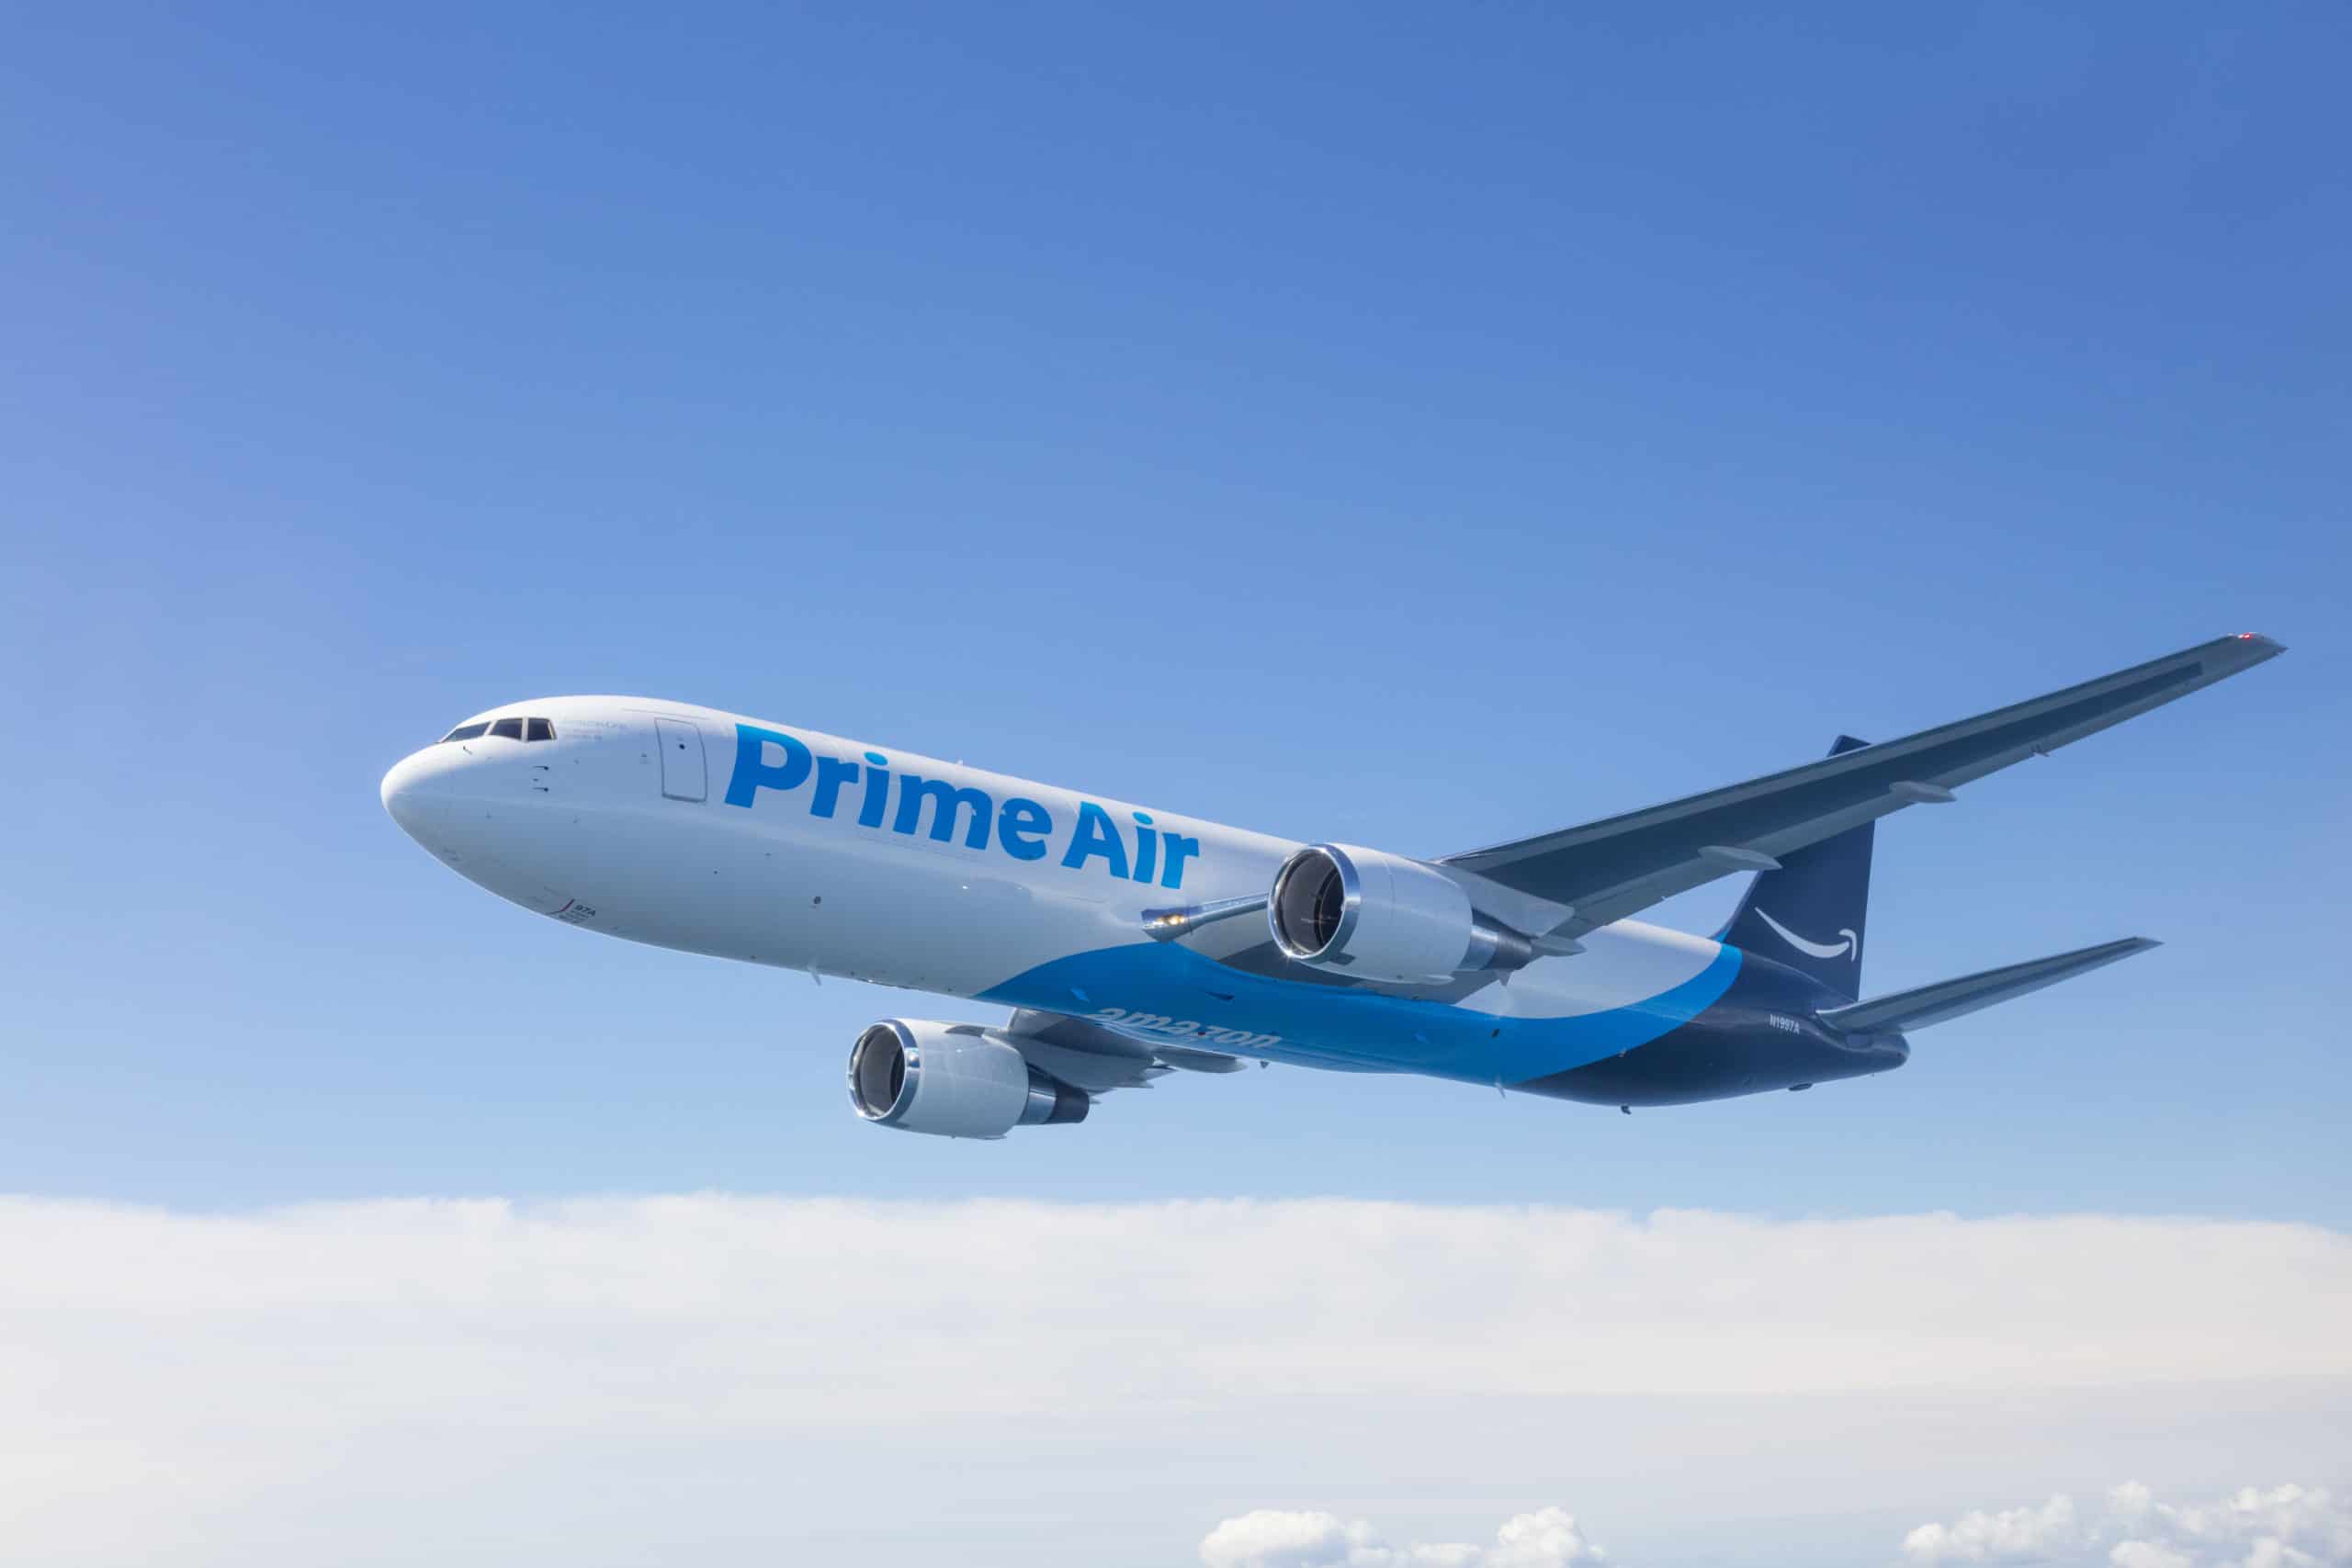 Amazon foregoes Atlas Air board seat by keeping holdings to a minimum